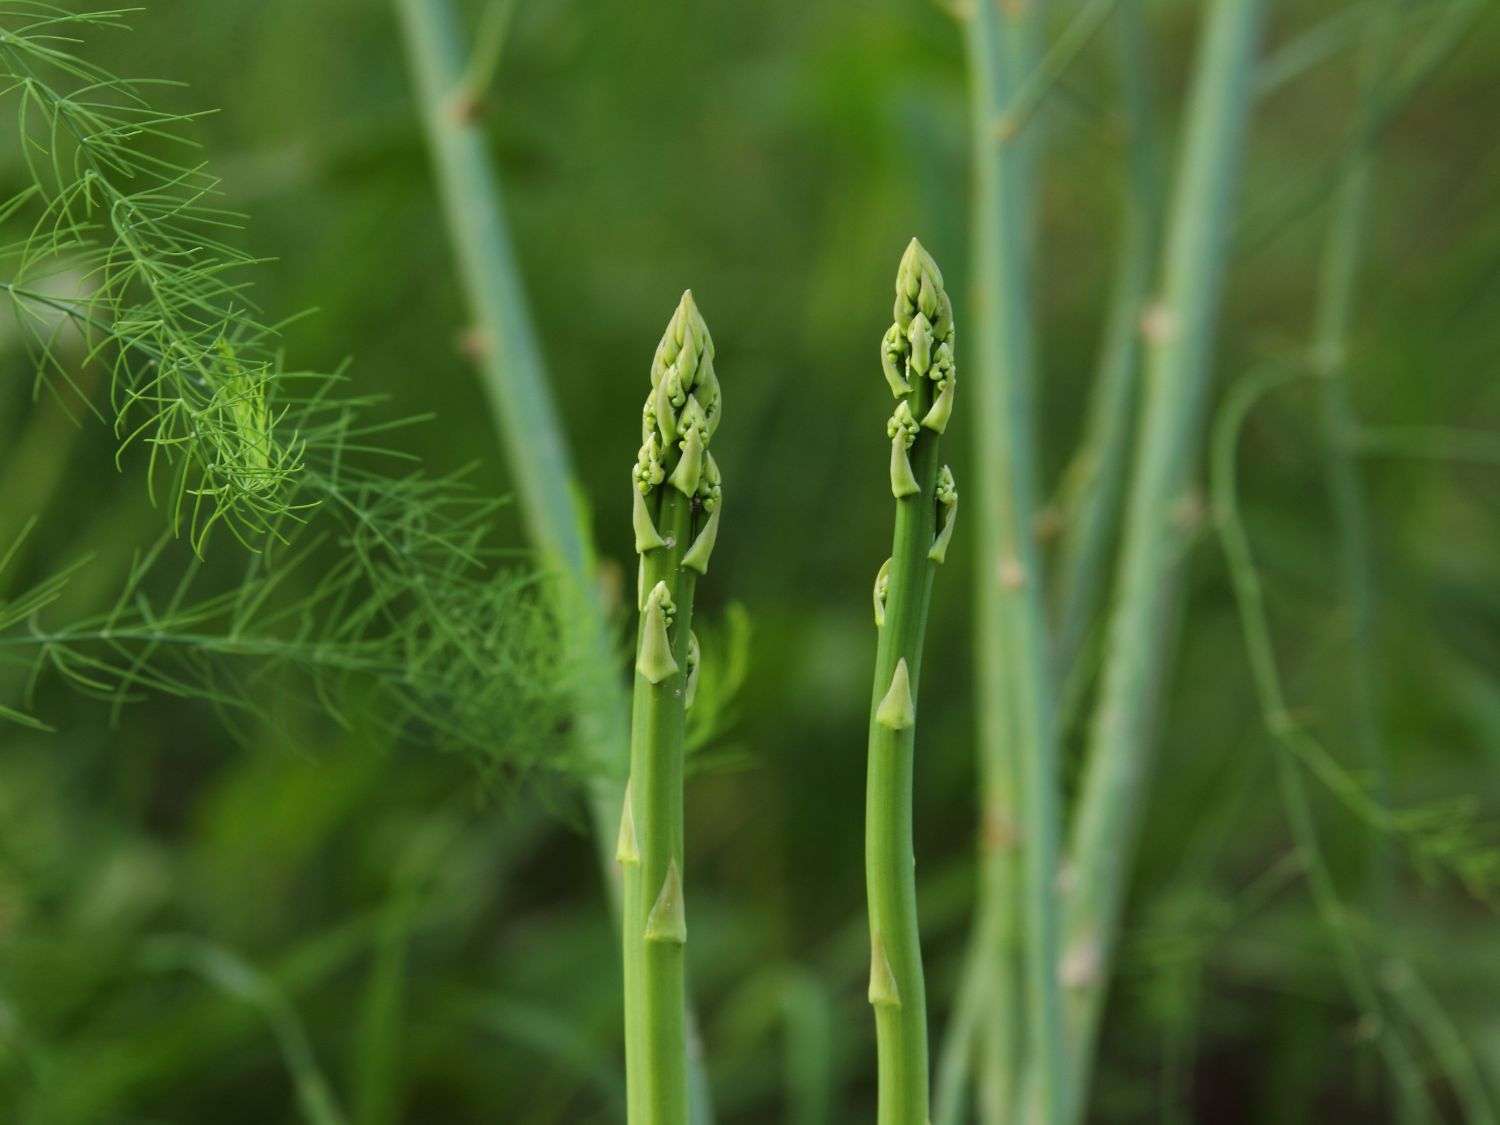 A close up photo of asparagus growing in the garden